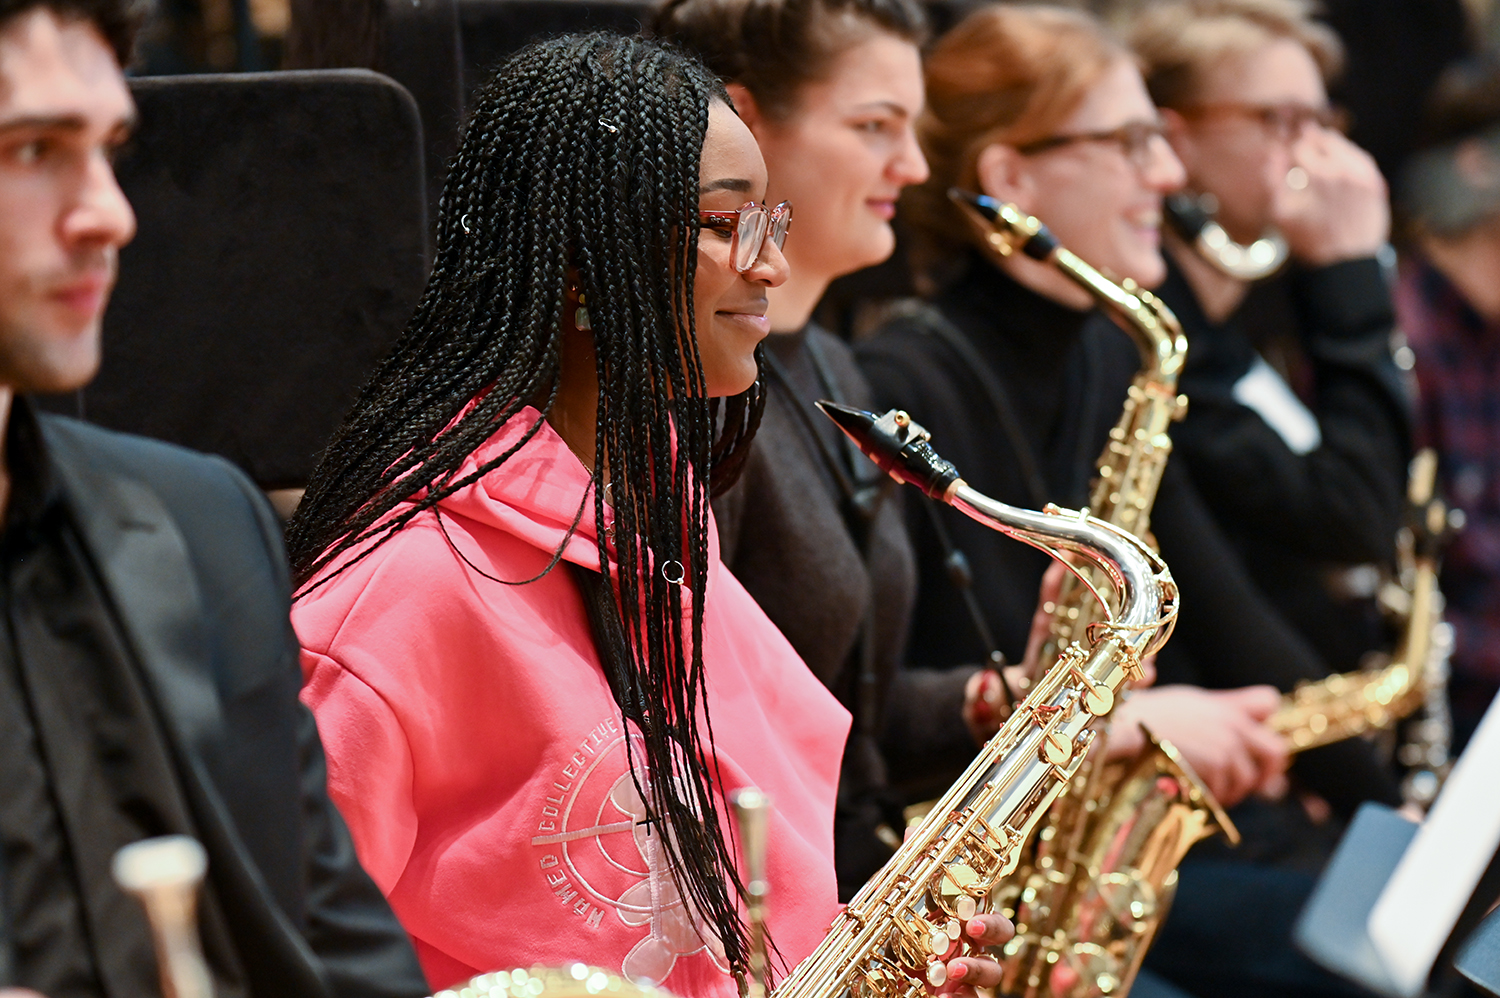 A row of saxophonists perform with the focus on one woman wearing a pink jumper